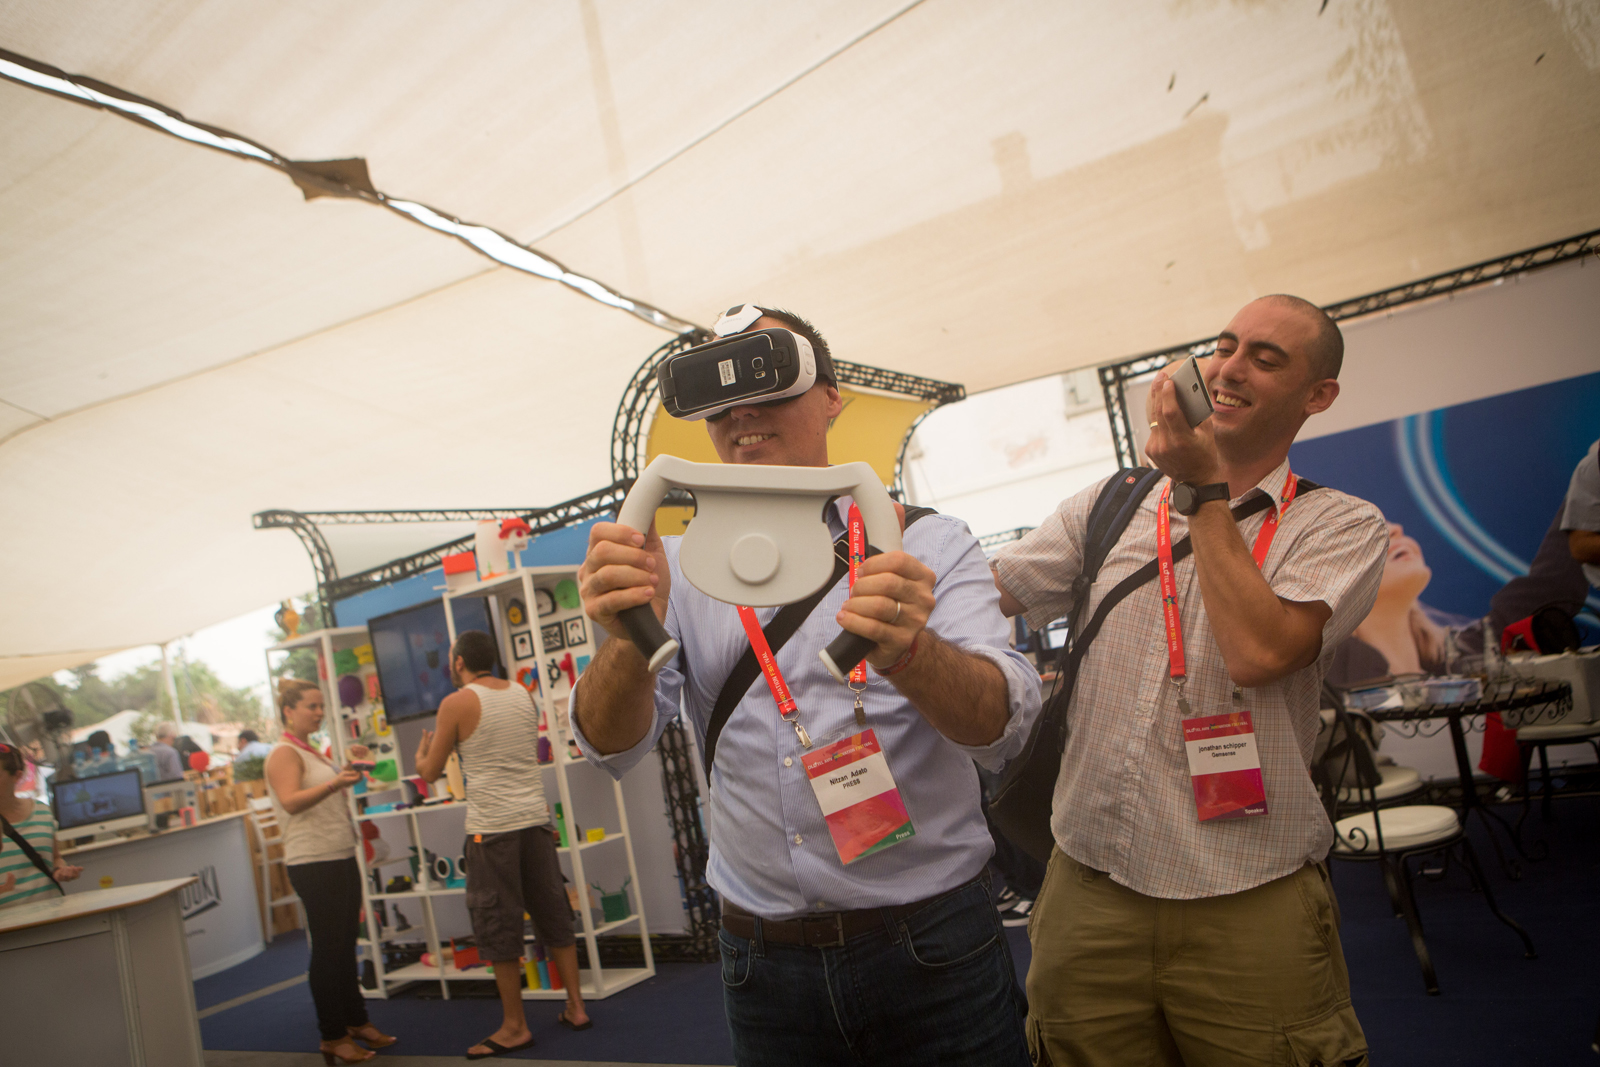 DLD Tel Aviv participants trying out new technologies. Photo by Miriam Alster/FLASH90